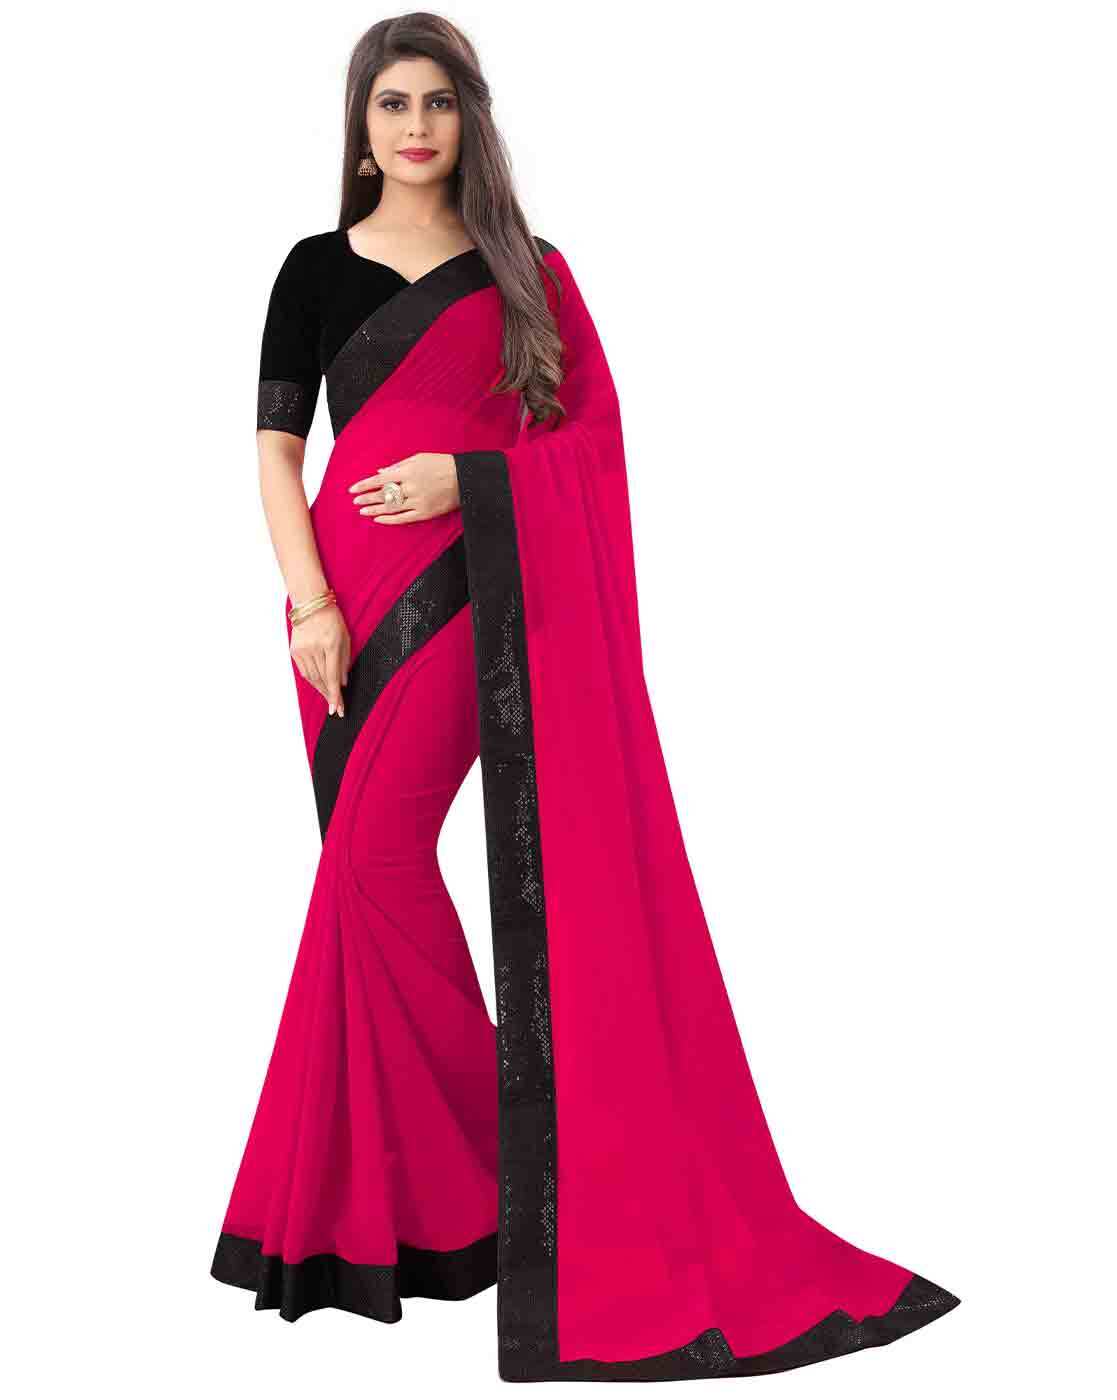 Amazing Look Sweetheart Neckline Pink Color Saree With Sequins Work Blouse